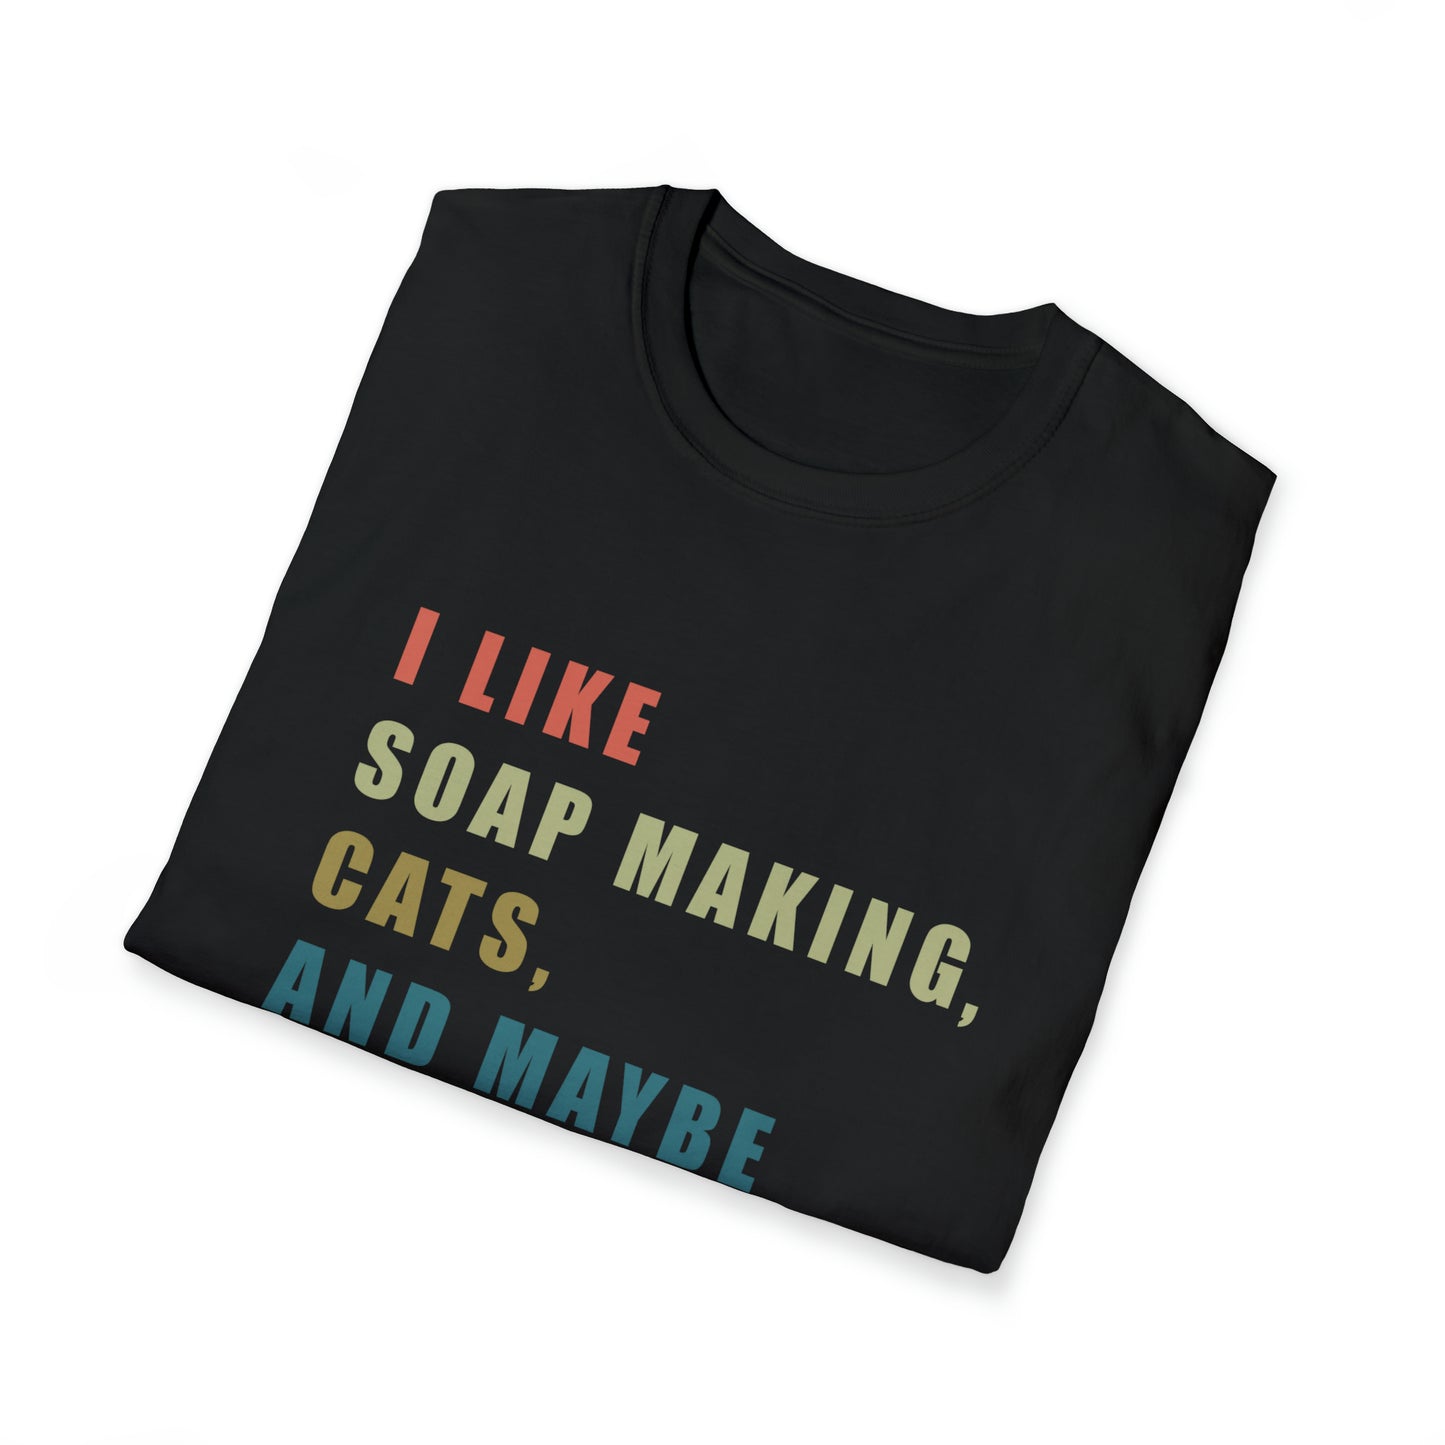 I Like Soap Making, Cats, and Maybe 3 People T-Shirt